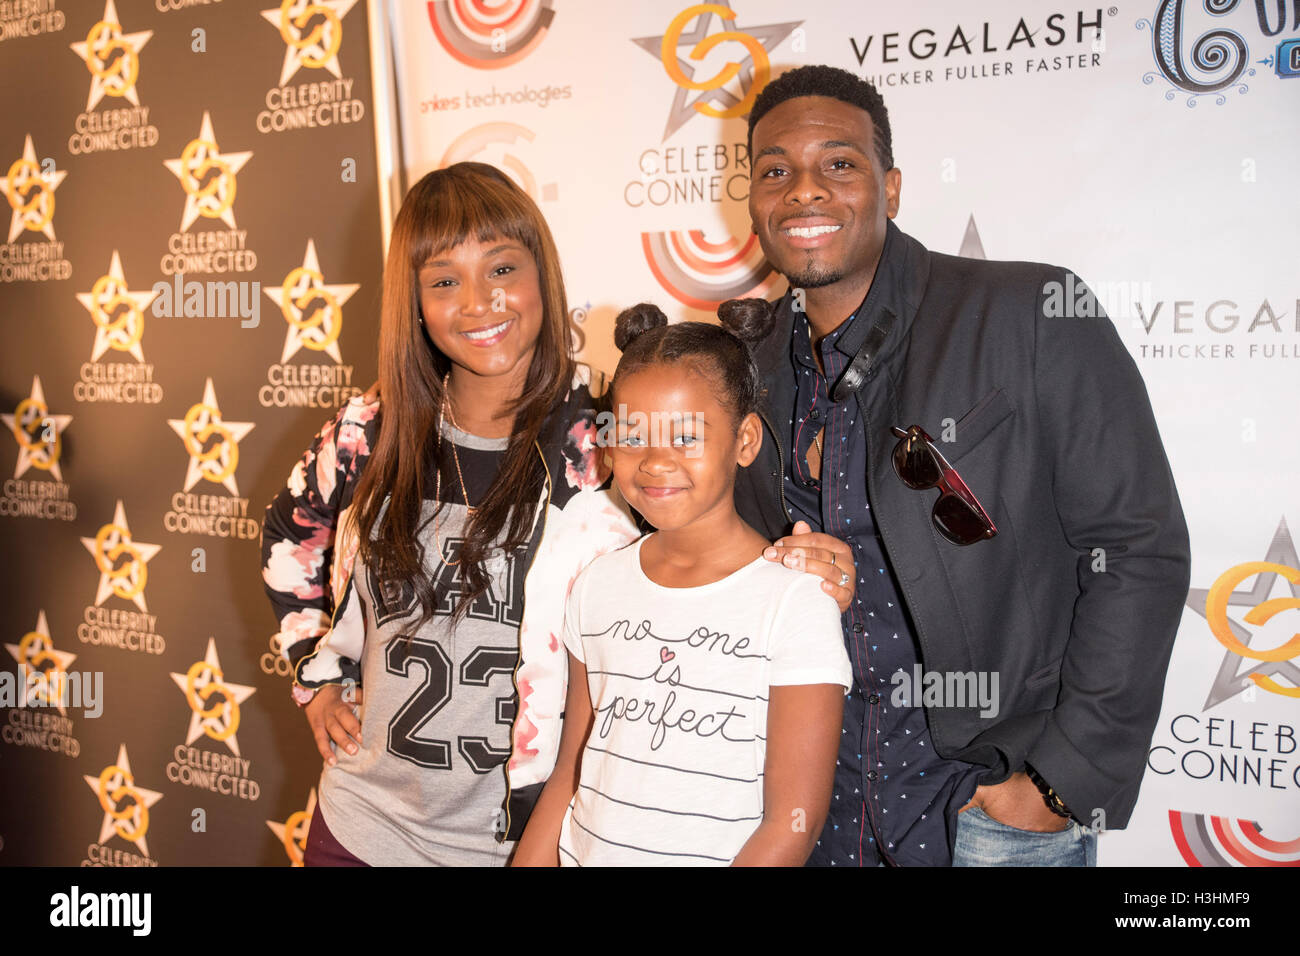 Kel Mitchell (r) with family arrive at Celebrity Connected 2016 Luxury Gifting Suite red carpet Honoring The Emmys® at the W Hotel Hollywood on September 17, 2016 in Hollywood, California. Stock Photo